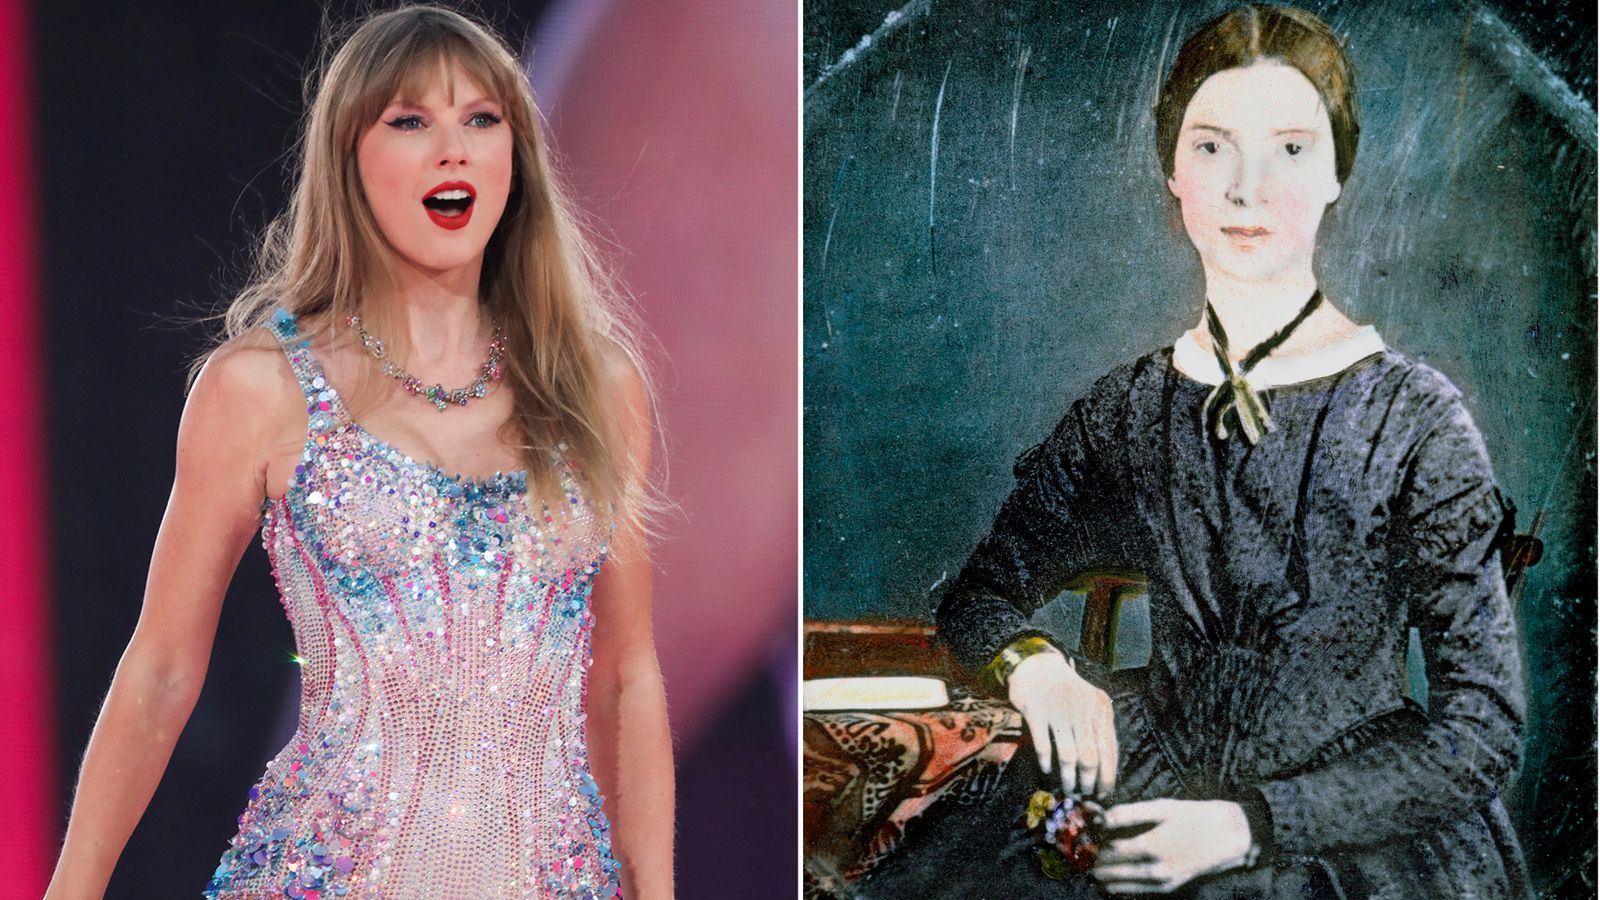 Taylor Swift revealed to be related to 19th Century American poet Emily Dickinson